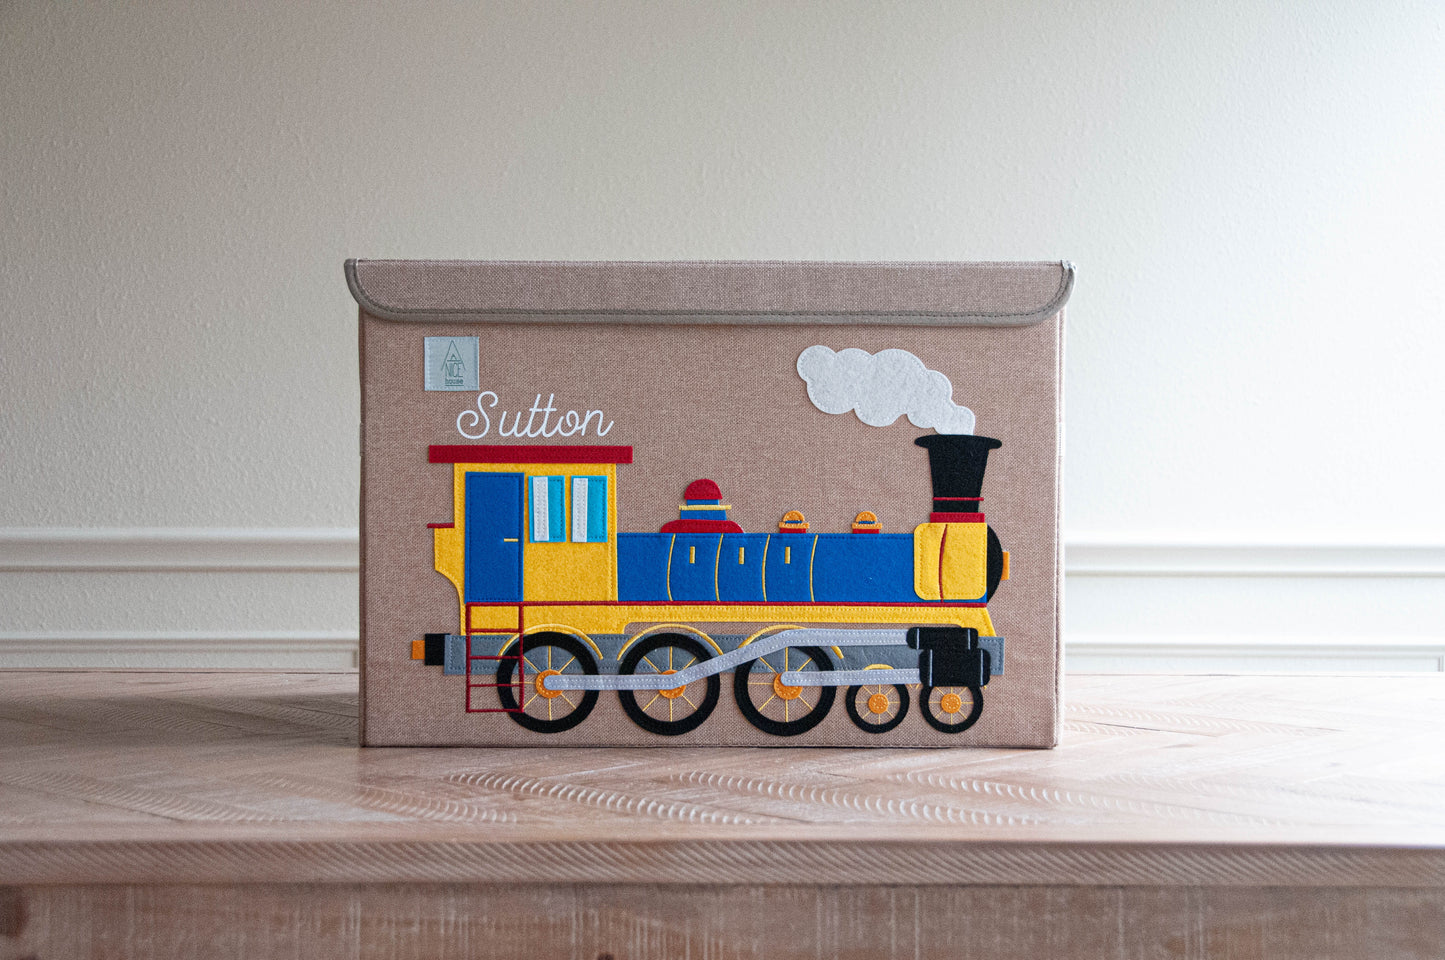 Fabric covered storage bin with lid that is also a personalized toy box. These personalized toy boxes are from A Nice House. This large toy box features a train appliquéd design on the front.